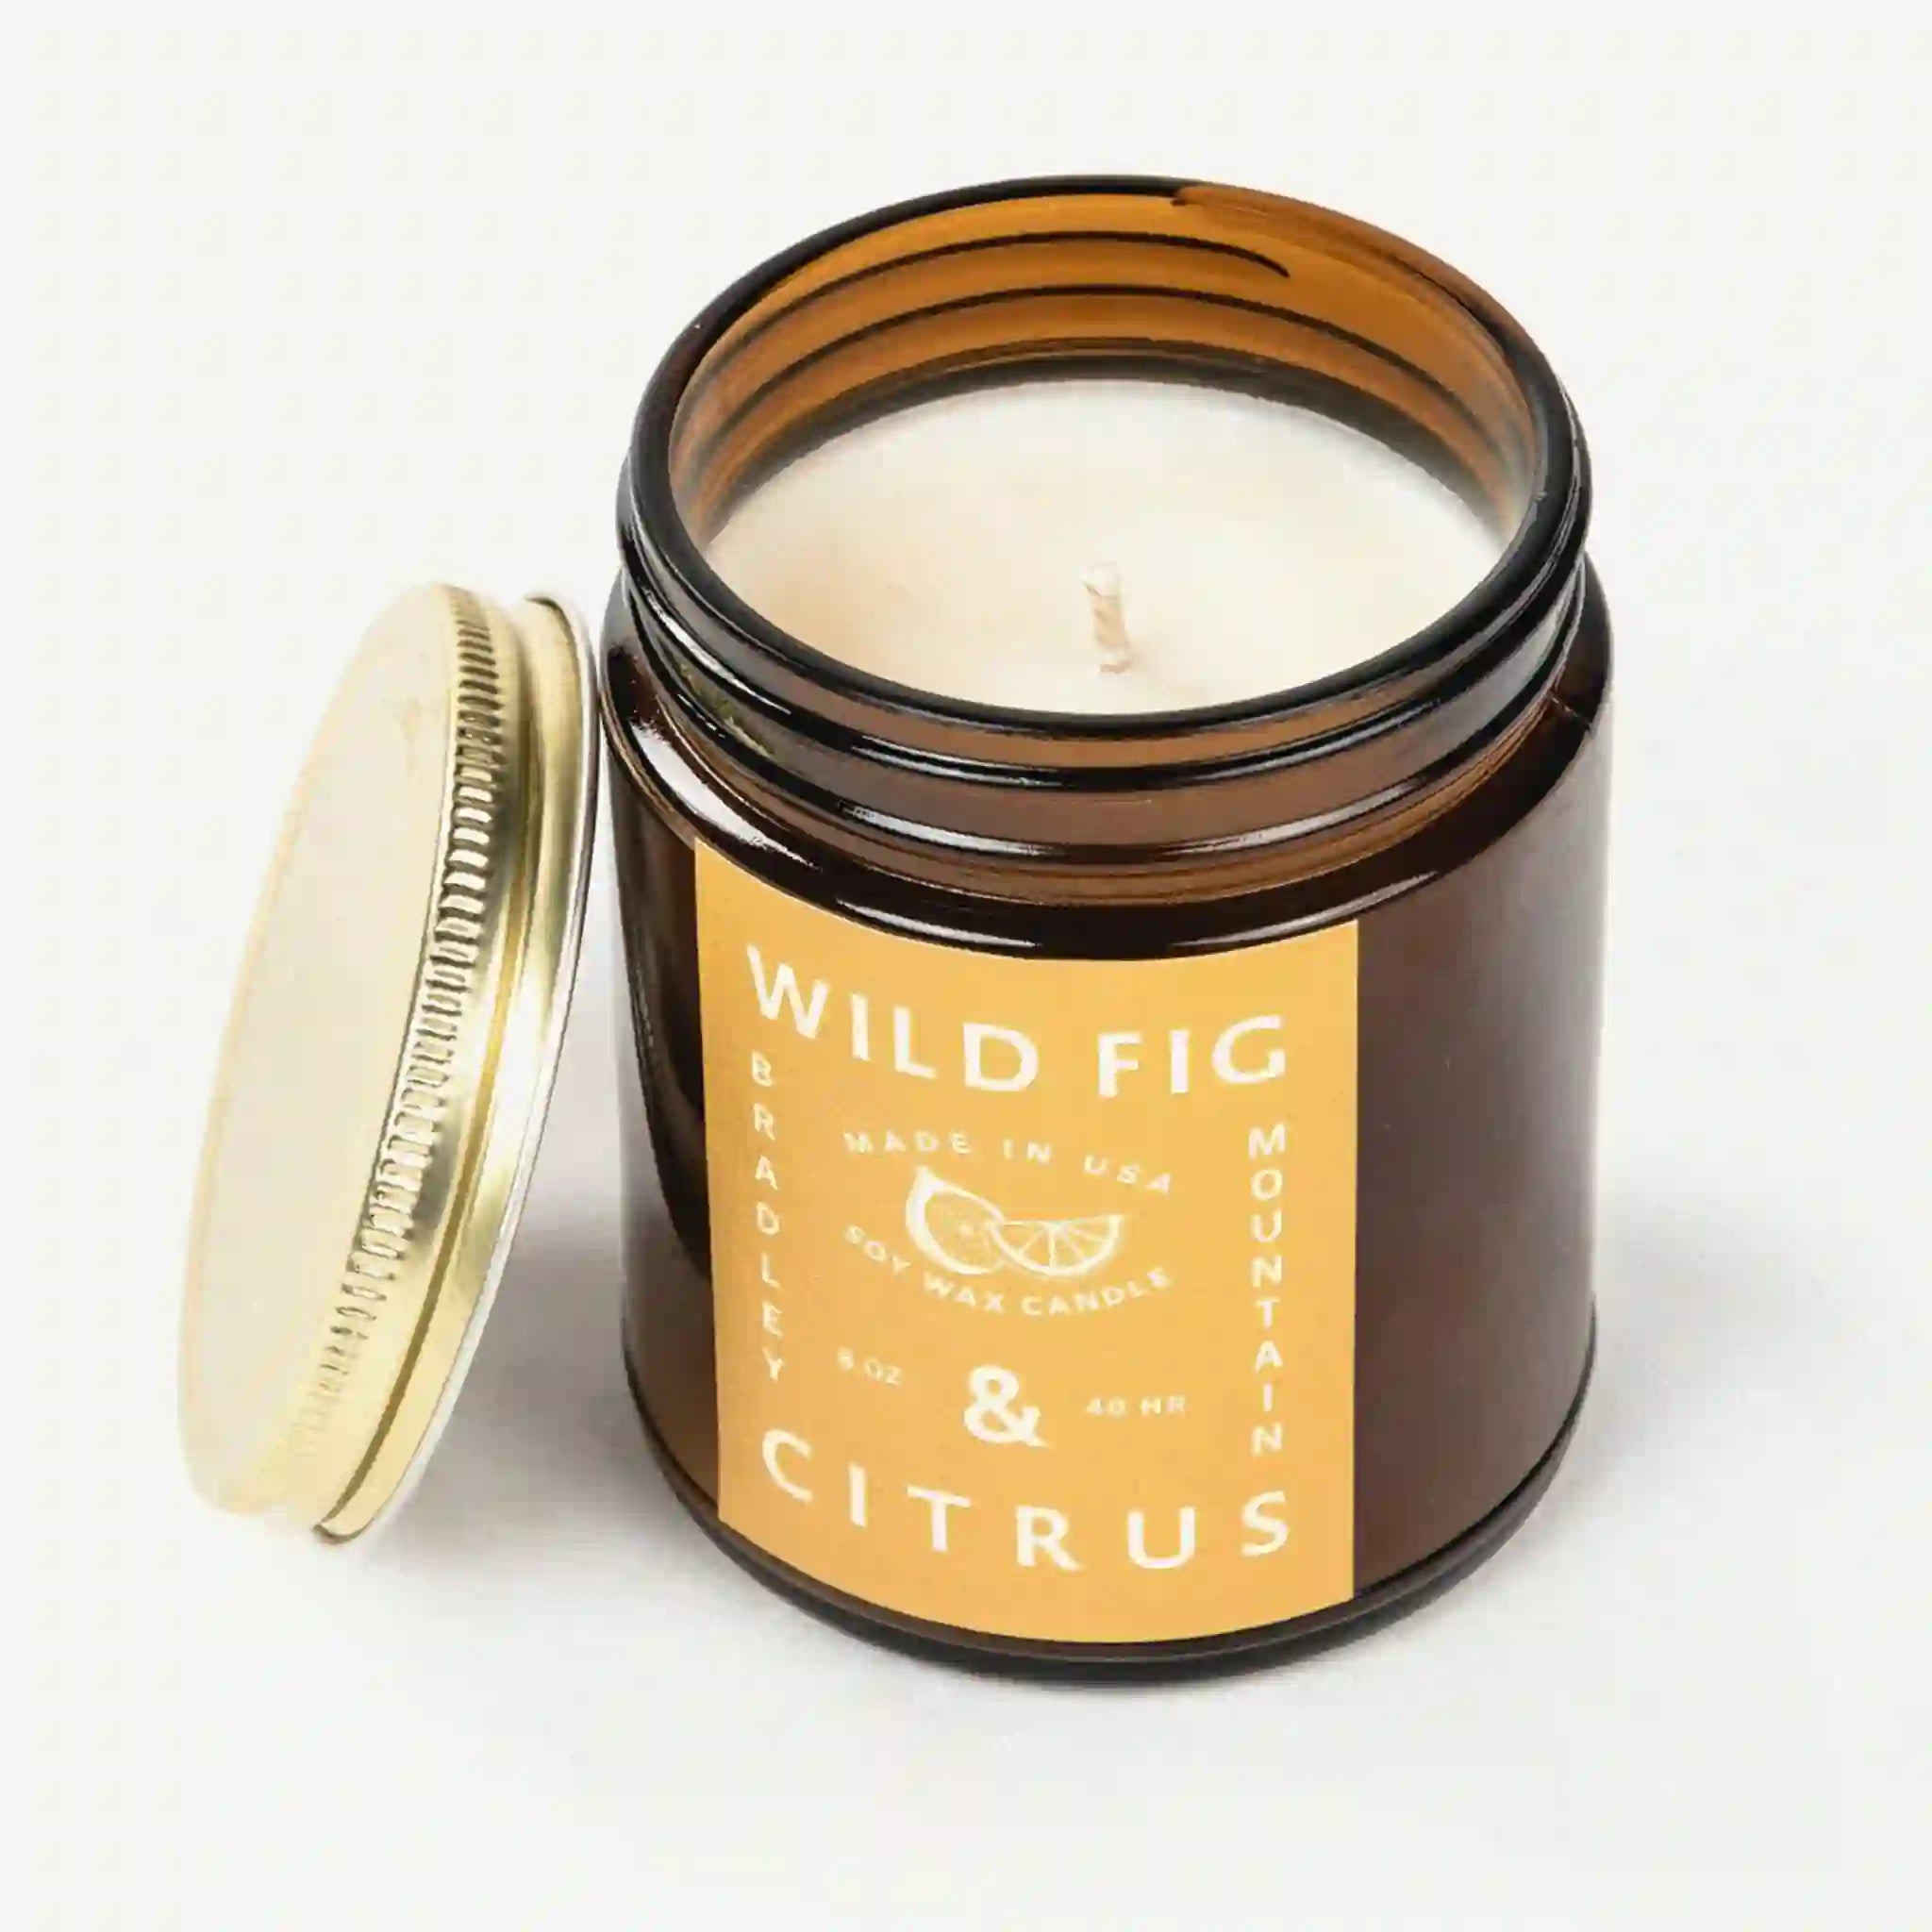 On a white background is an amber colored jar candle with a yellow label and white text that reads, "Wild Fig & Citrus". 